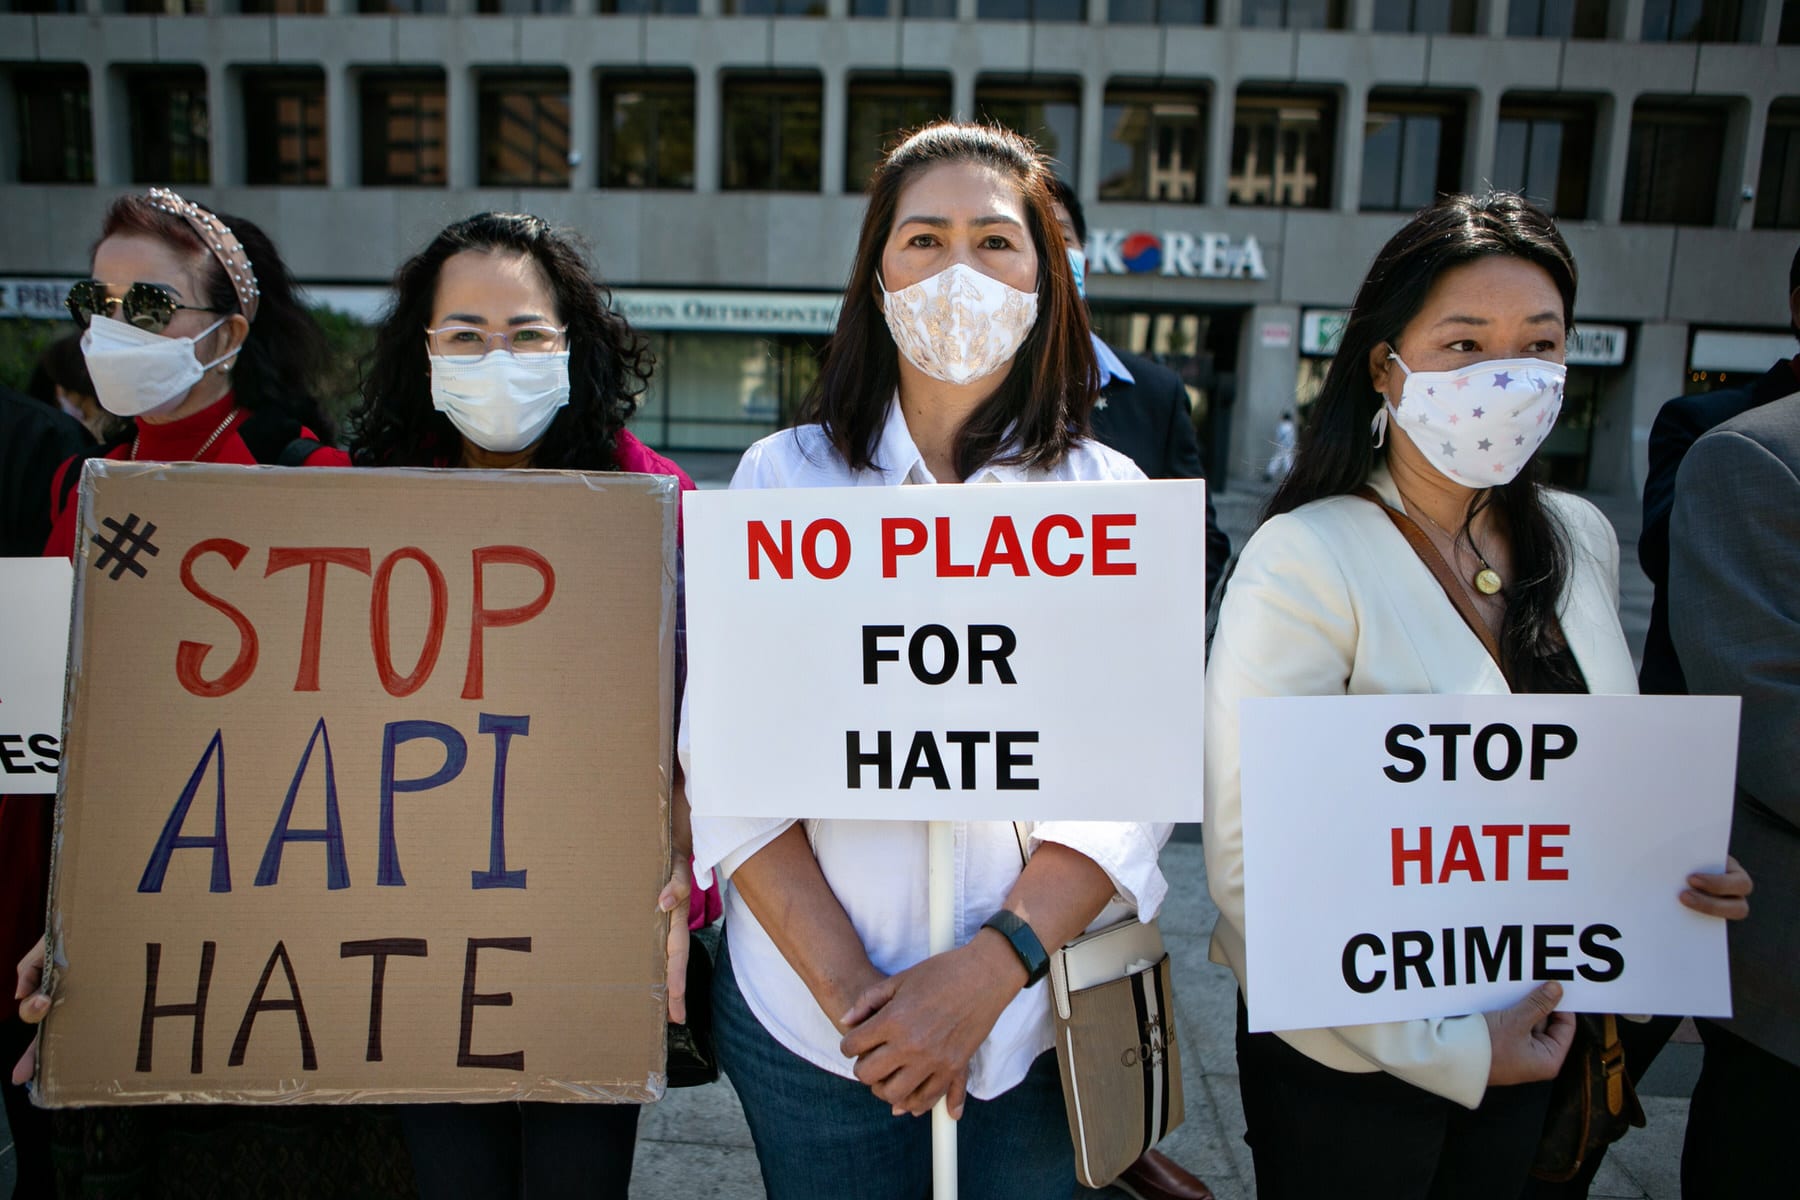 Asian community members hold signs calling for hate to stop.